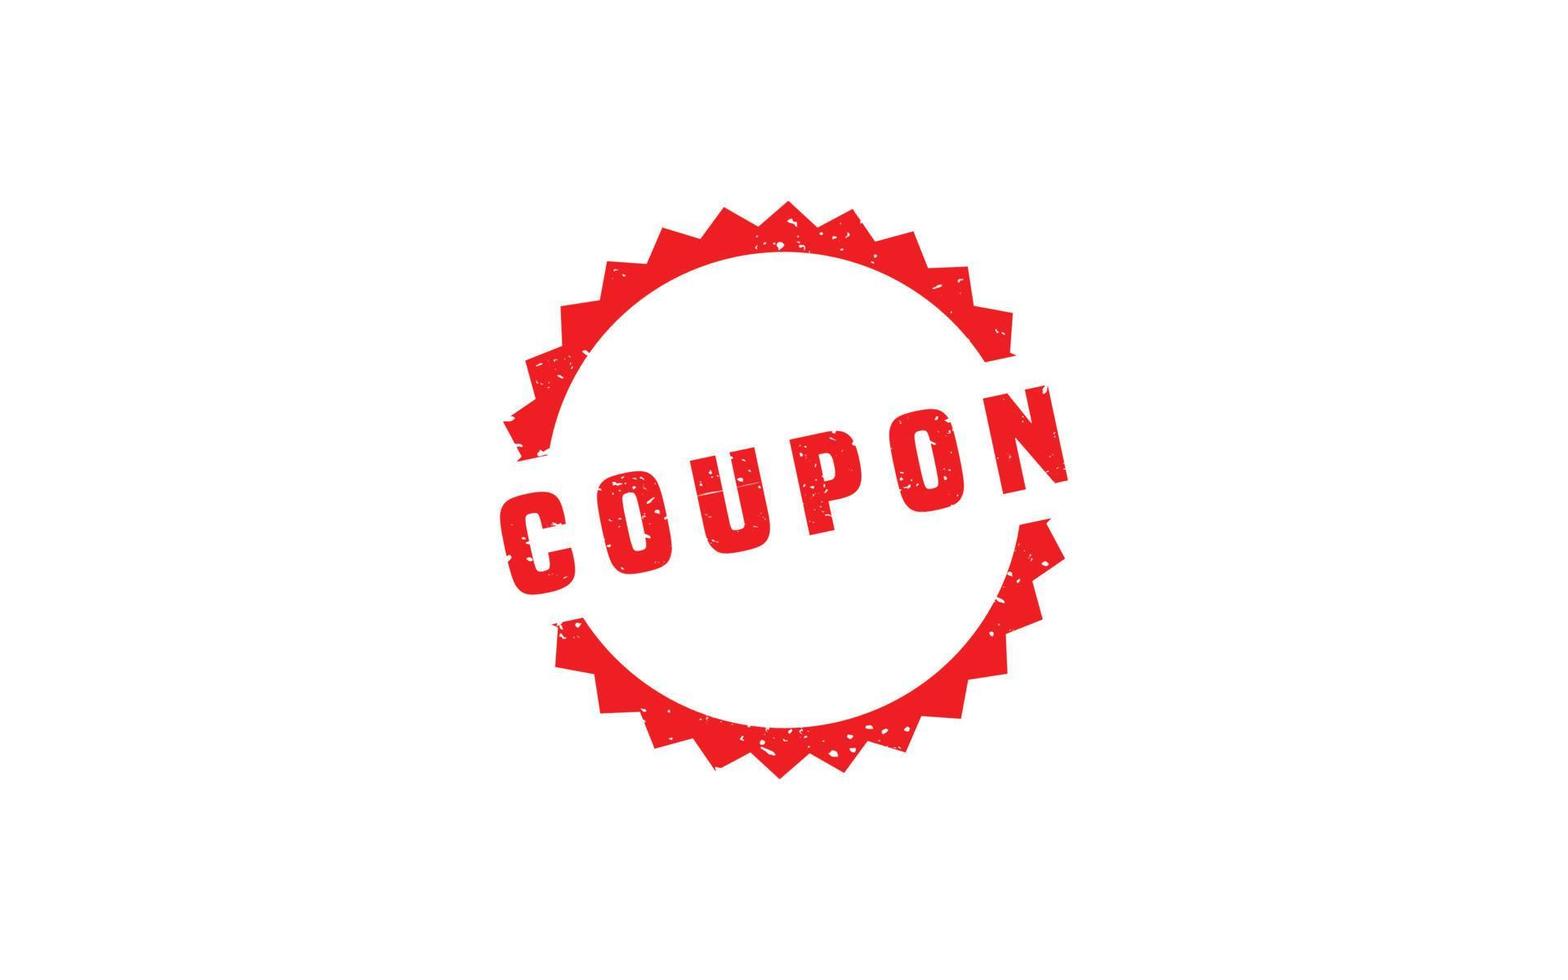 COUPON rubber stamp with grunge style on white background vector